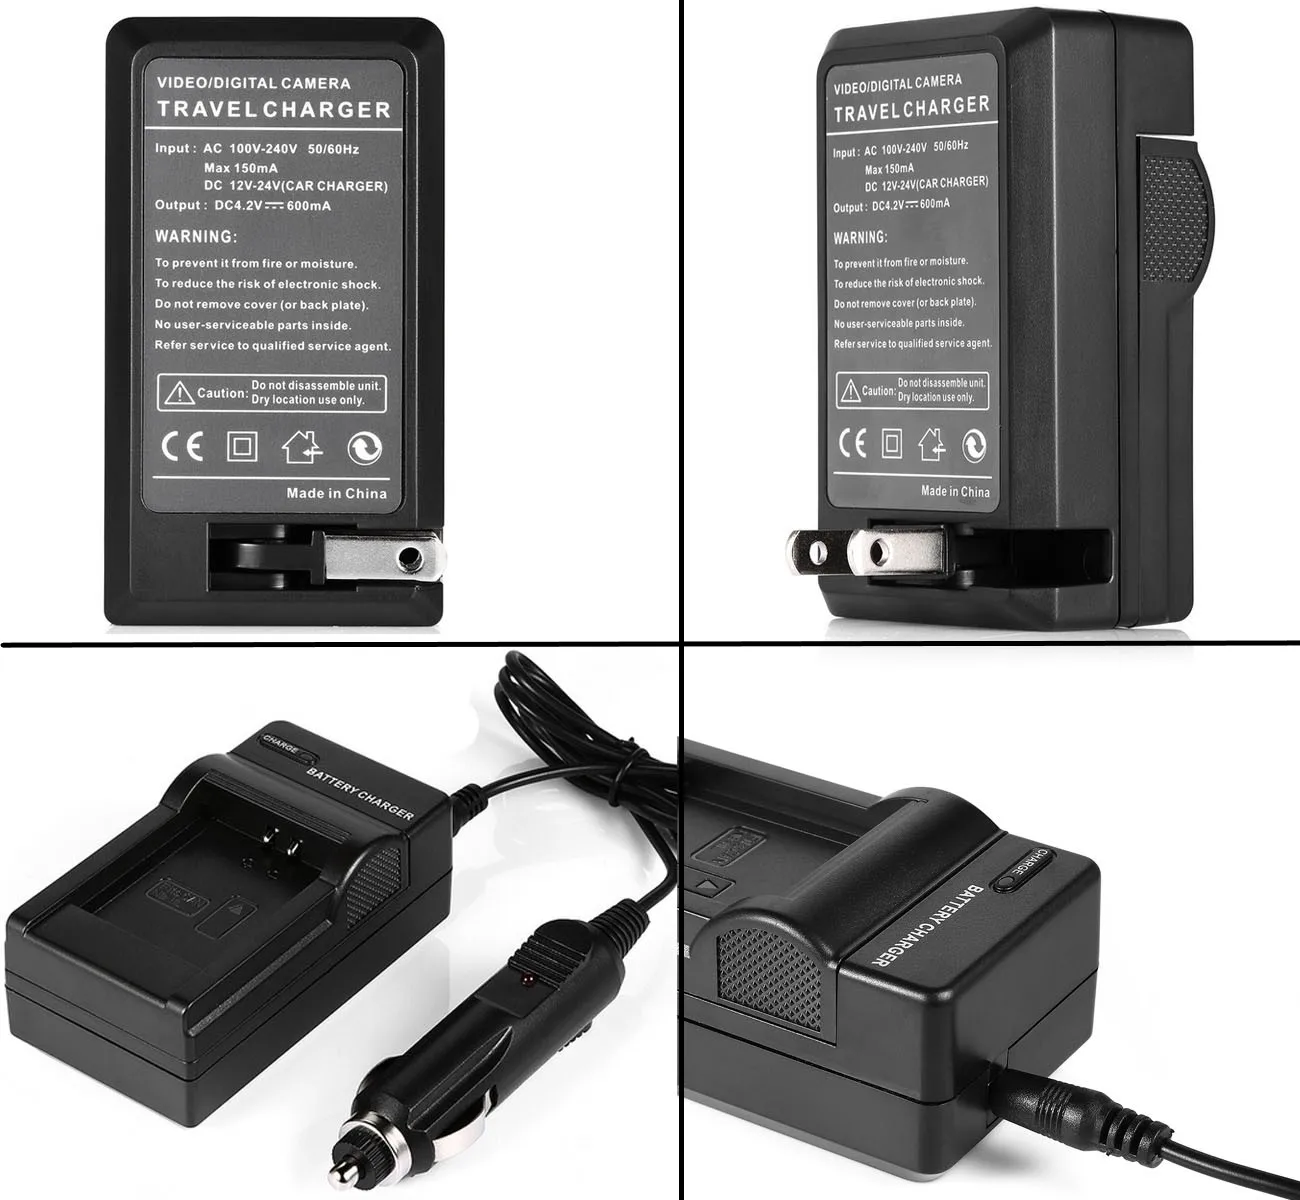 NV-GS11 NV-GS15 Camcorder Battery Charger for Panasonic NV-GS1 NV-GS3 NV-GS4 NV-GS5